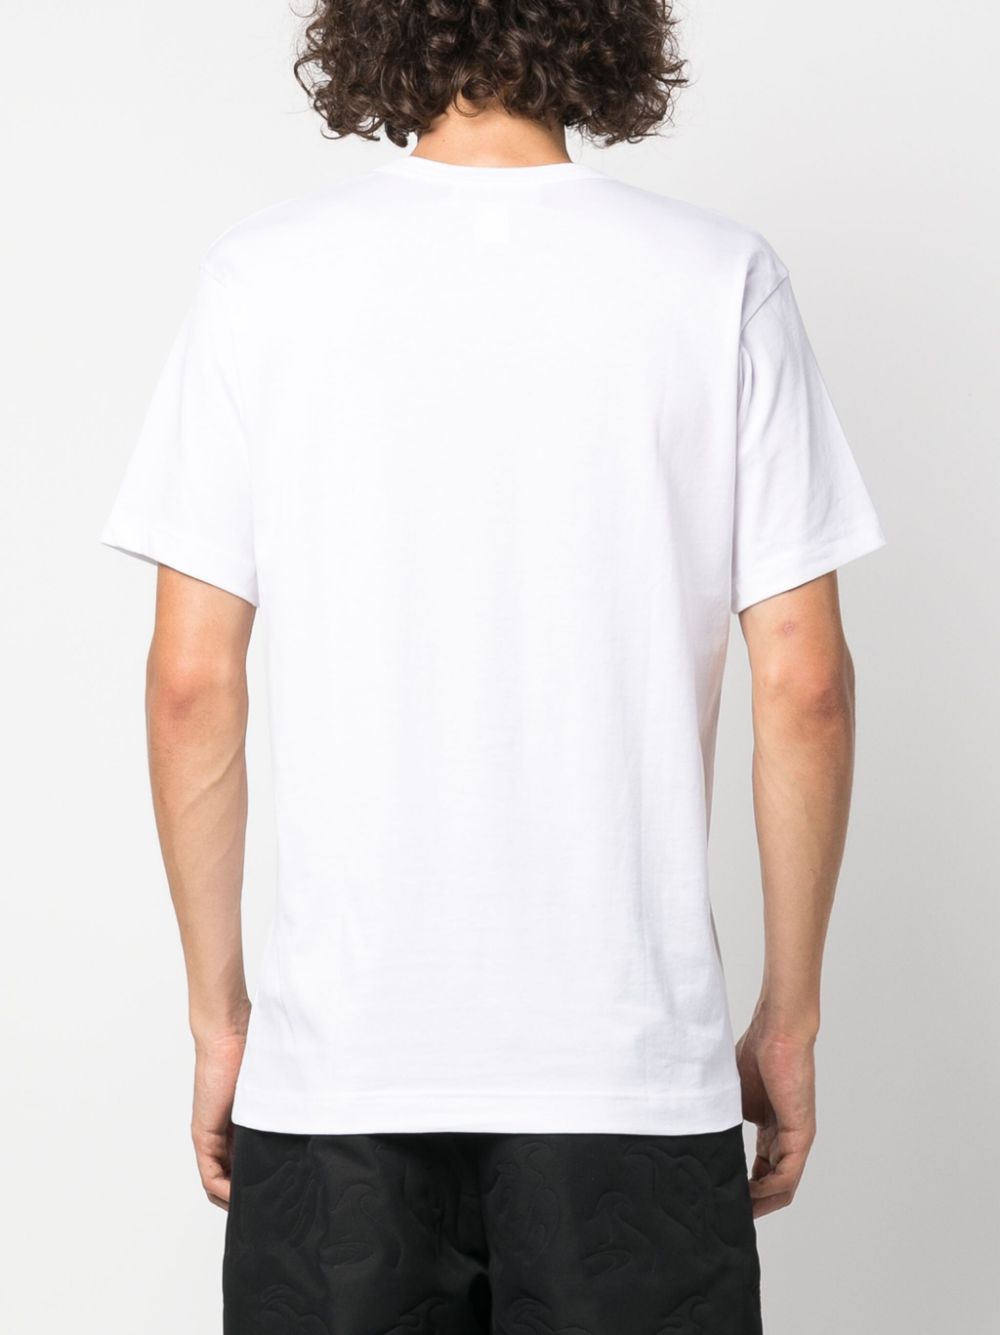 white t-shirt for Lacoste